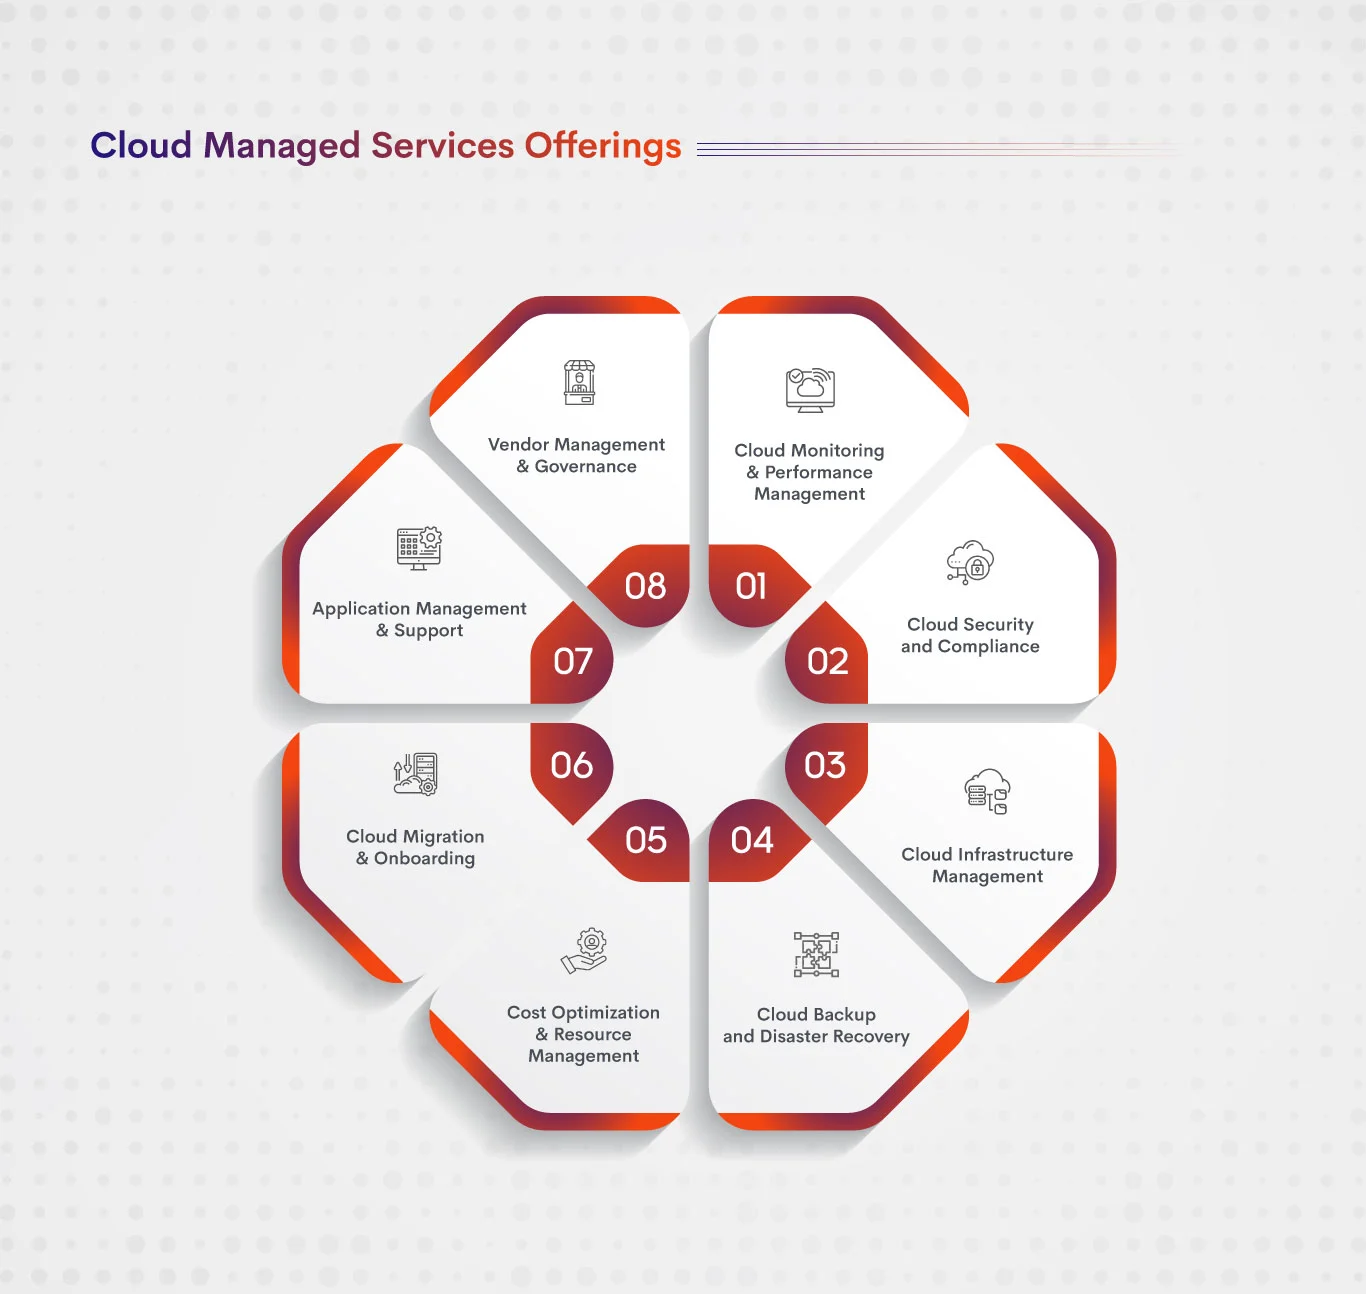 cloud-managed-services-offersings